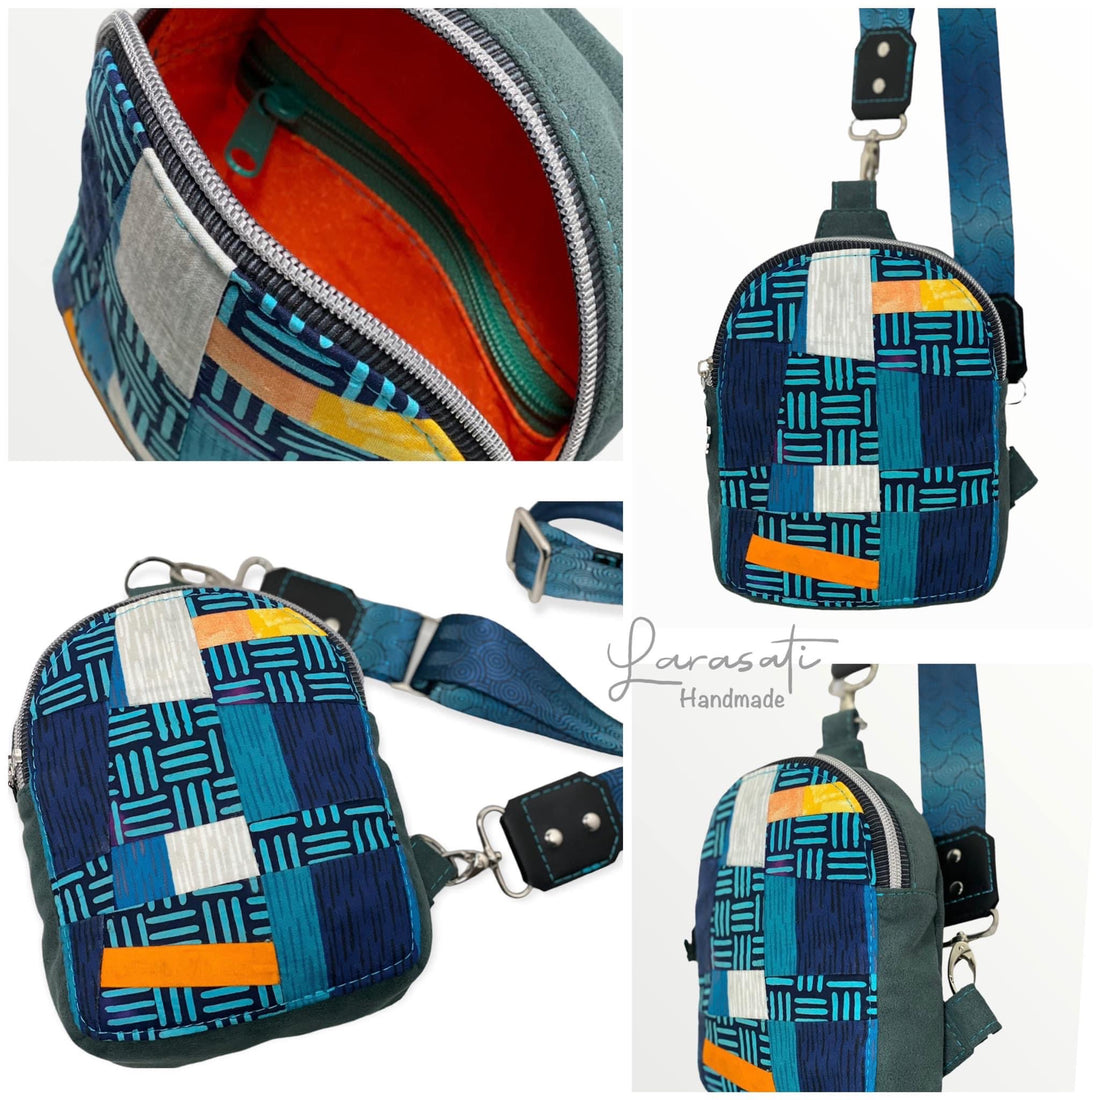 Mav Pack PDF Sewing Pattern (includes SVGs, A0 file, and video!)